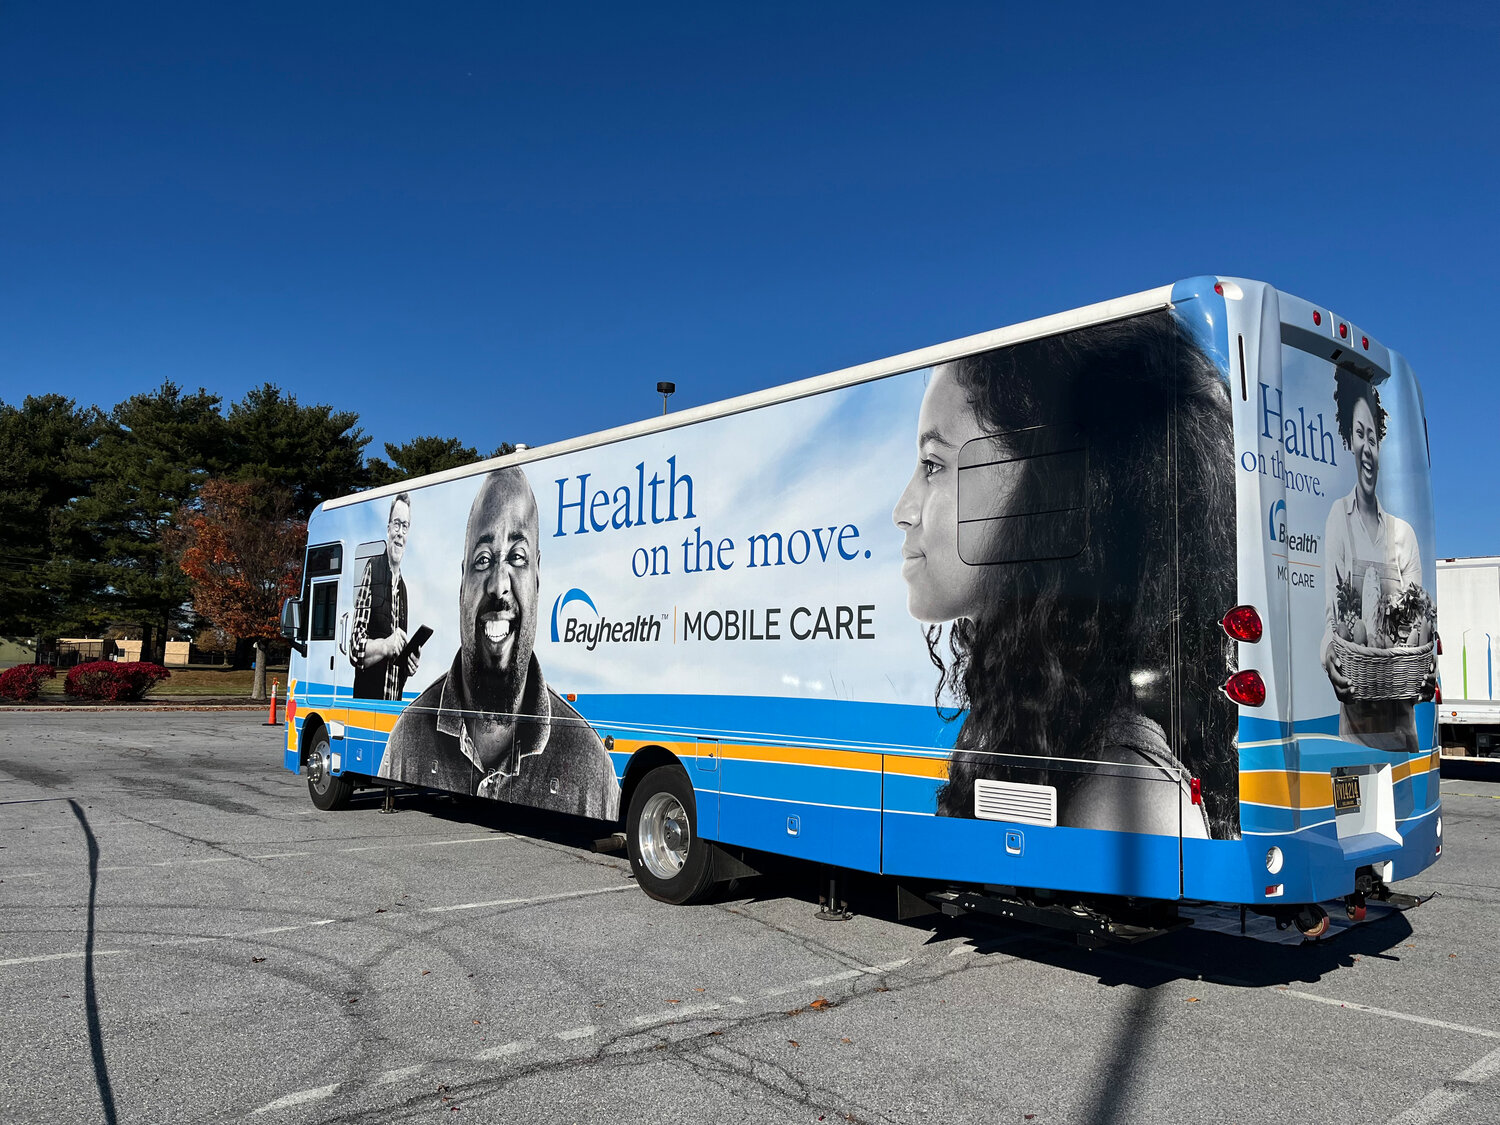 Bayhealth team members and clinical staff took health on the move, bringing free services to community members at the Blue Hen Mall/Corporate Center, Dover, on Nov. 14. Several area residents took advantage of free flu vaccinations, blood pressure checks and cancer education.